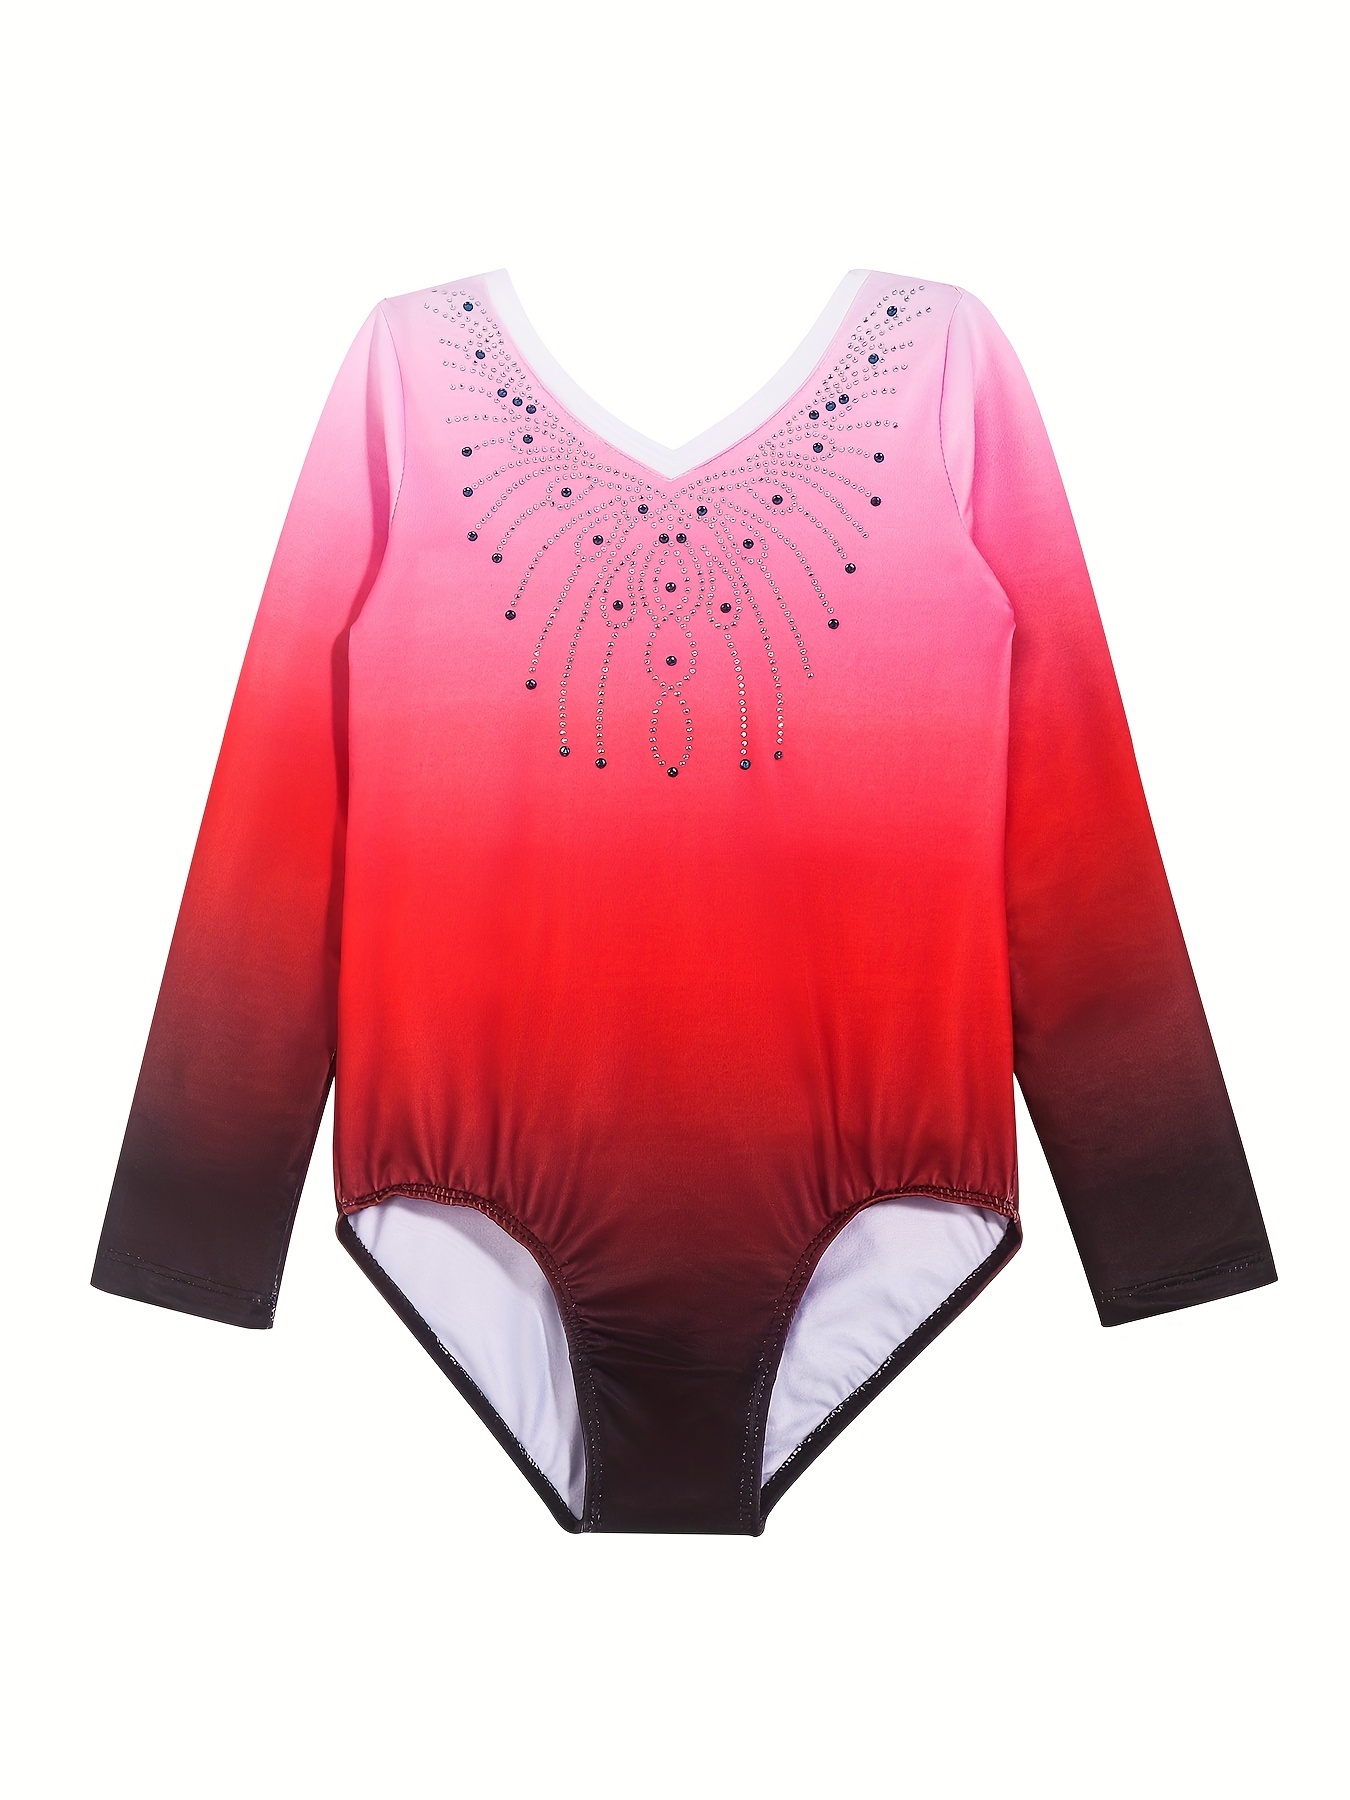 Athletic dress with integrated leotard - Women